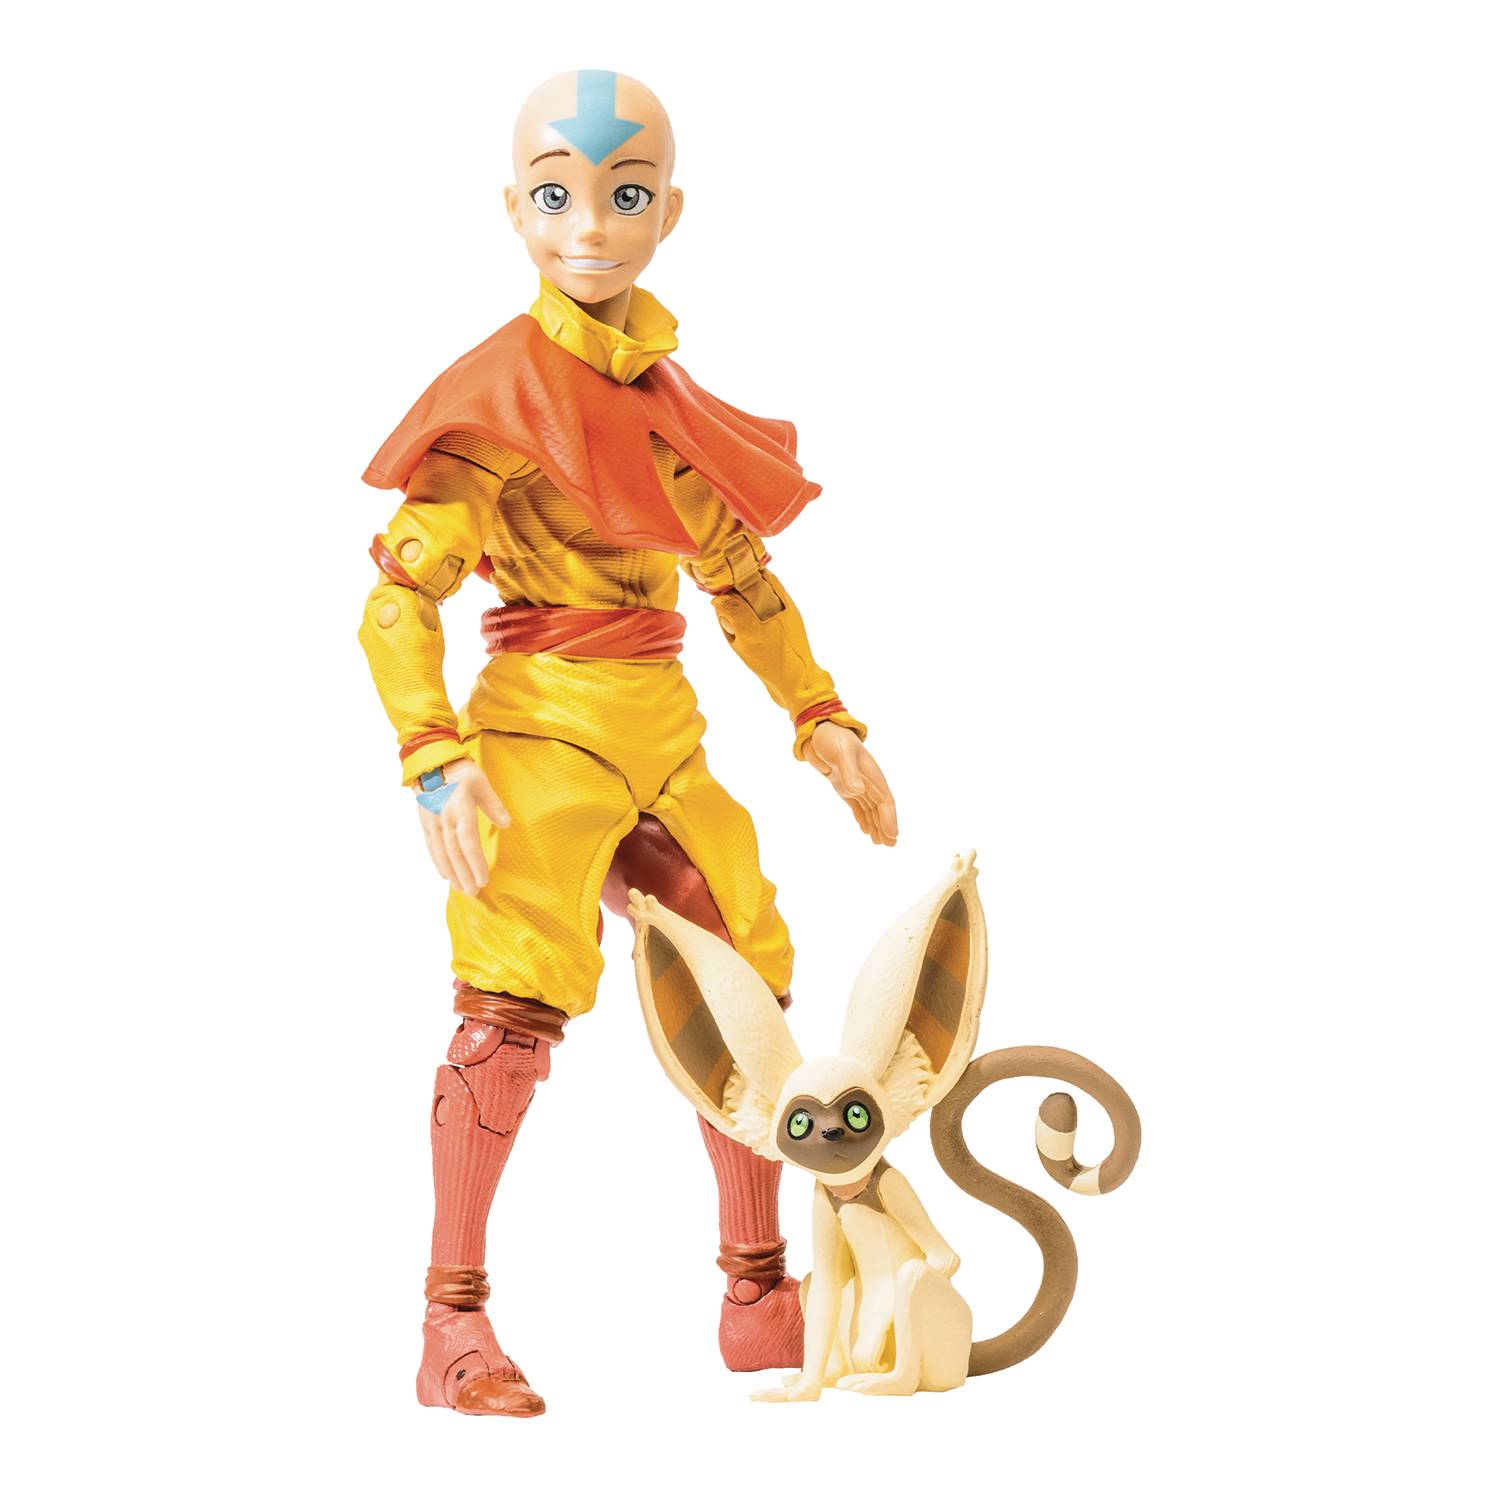 Avatar The Last Air Bender Wave 2 Aang W/ Momo 7 Inch Action Figure